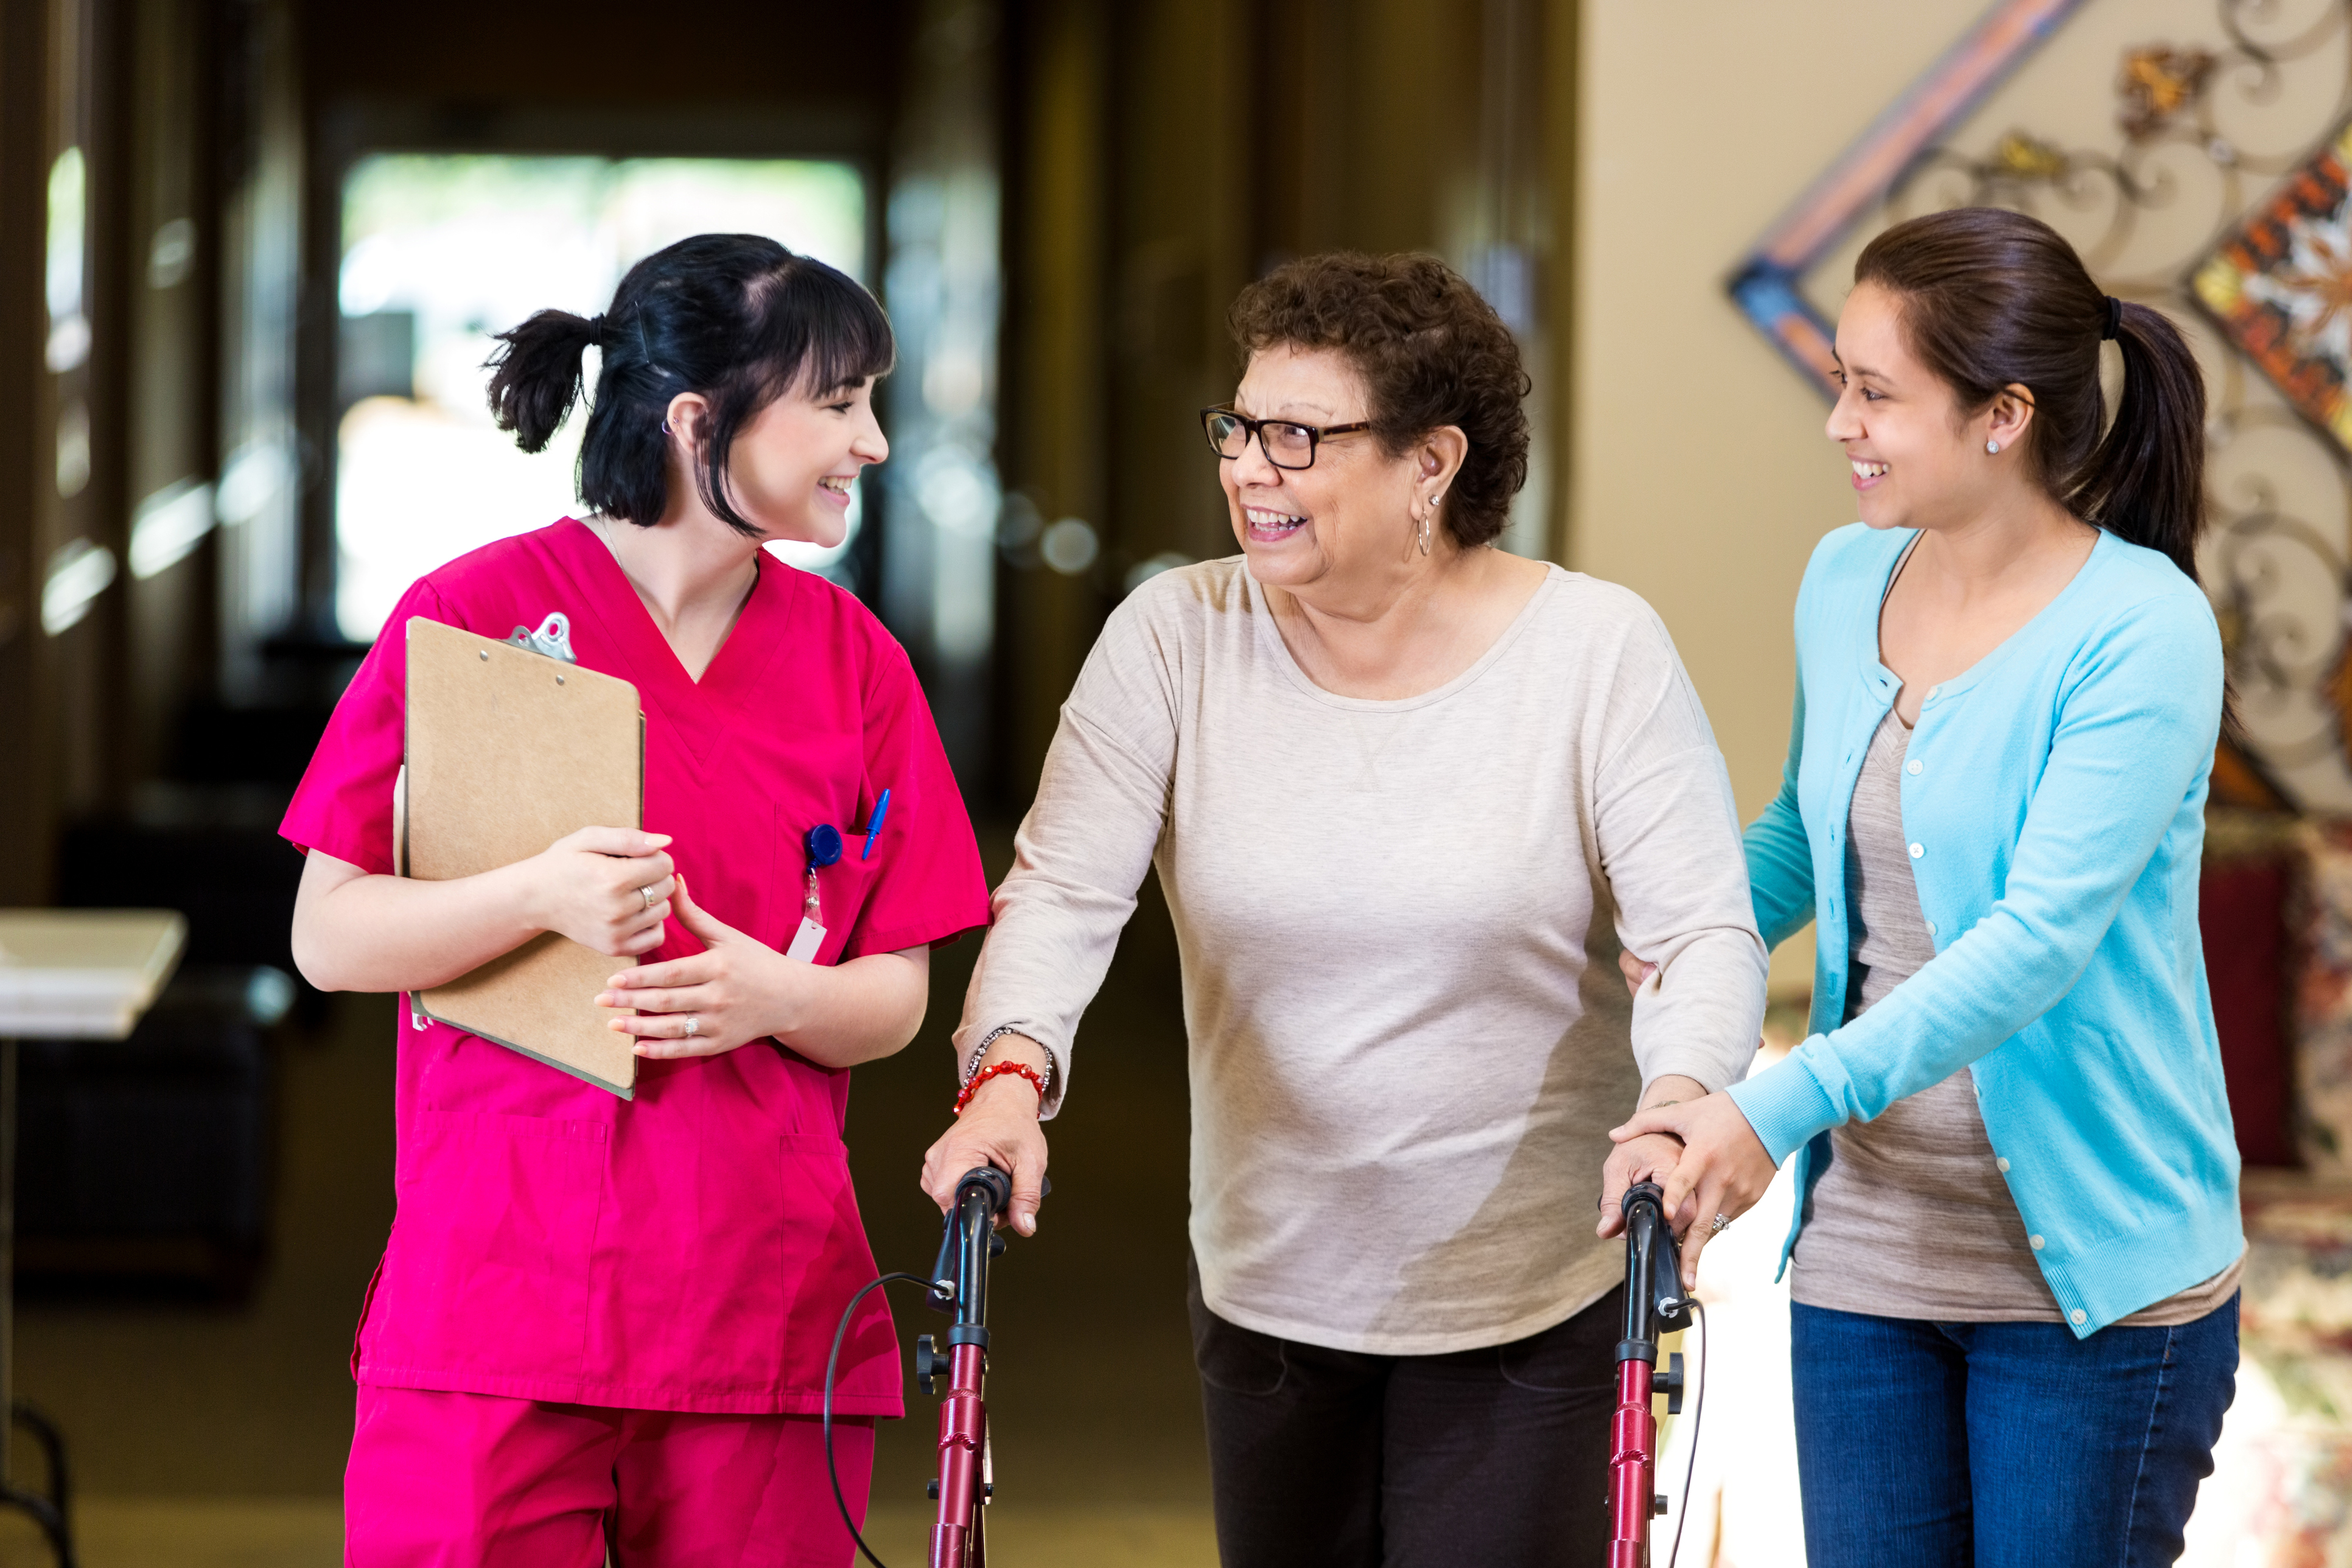 caretakers helping a person in a care home